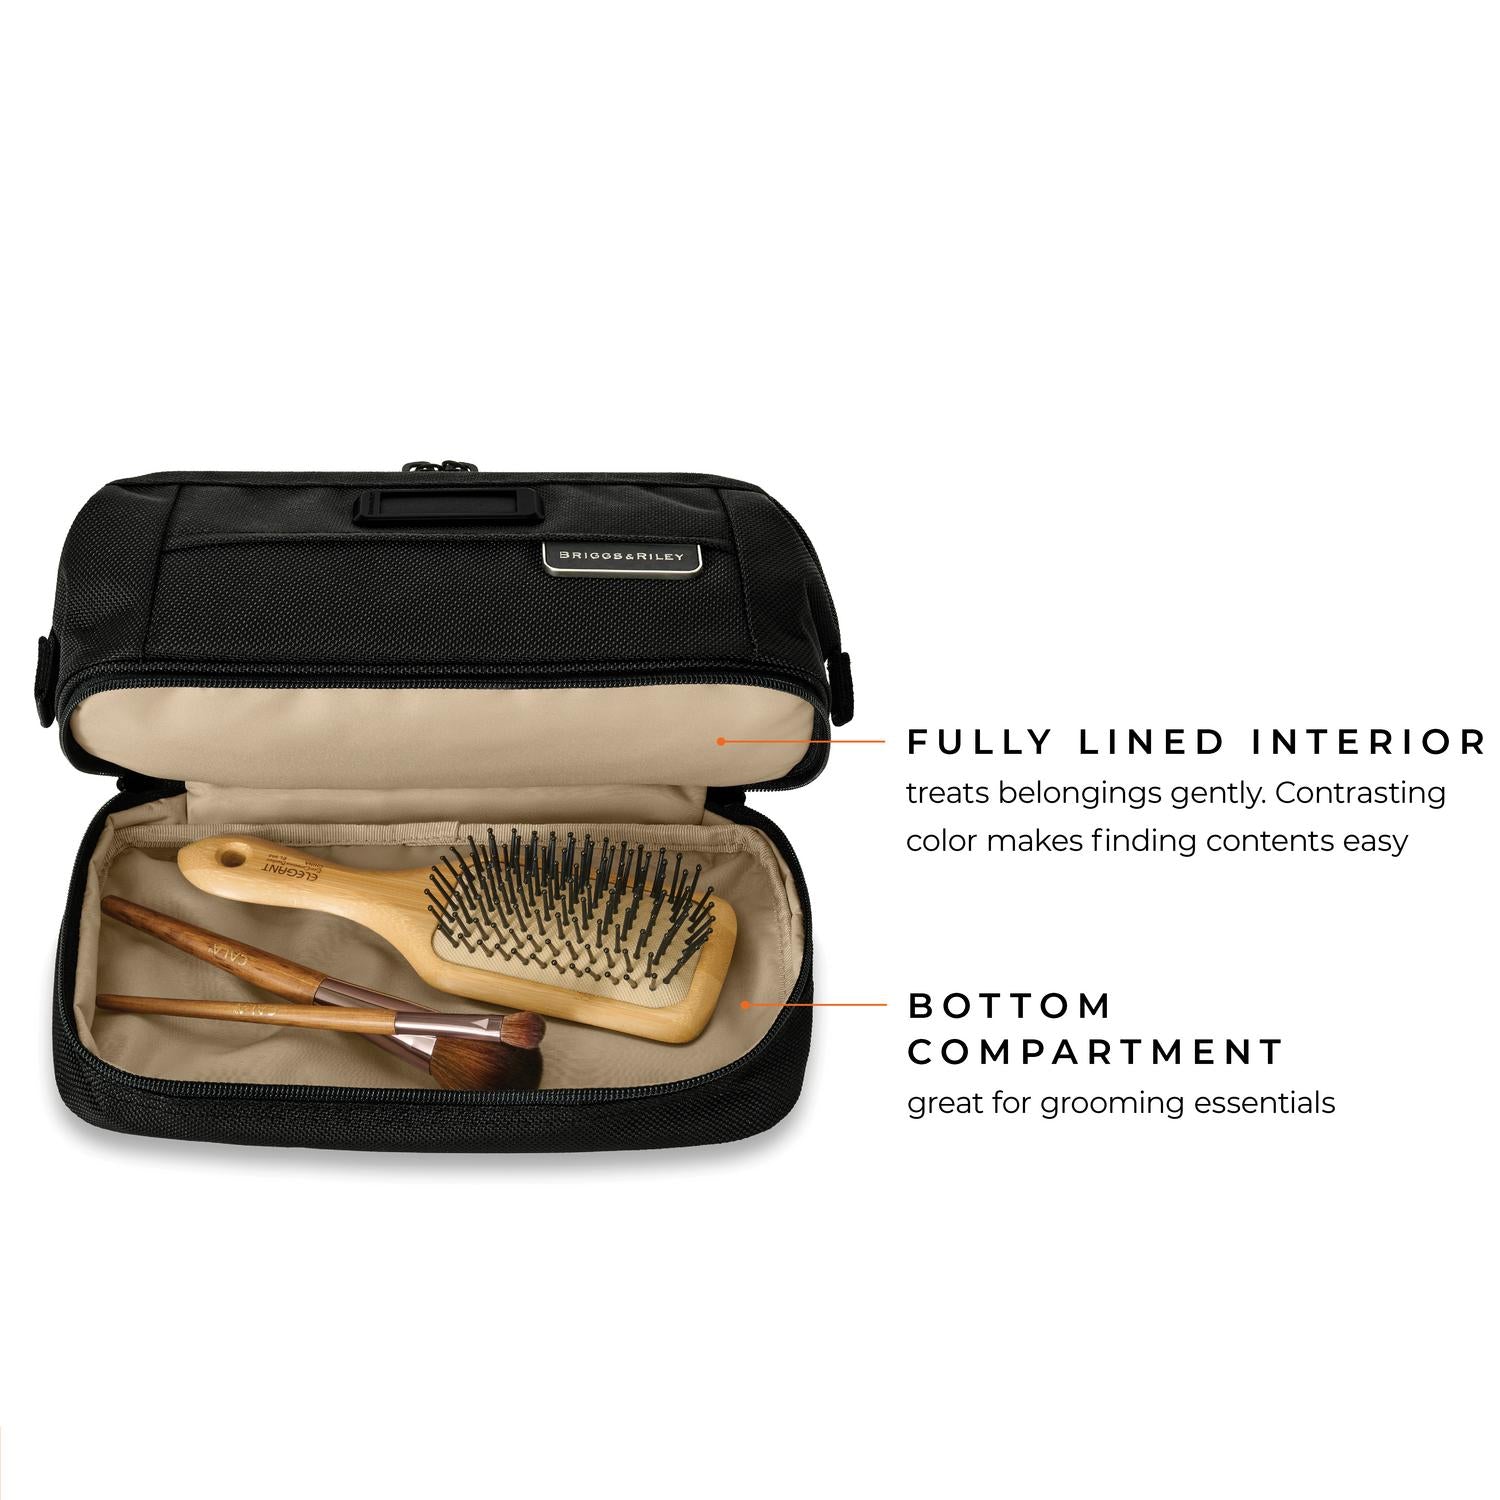 Briggs and Riley Duo Essentials, Kit, FULLY LINED INTERIOR treats belongings gently. Contrasting  color makes finding contents easy, B O T T O M  COMPARTMENT great for grooming essentials #color_black